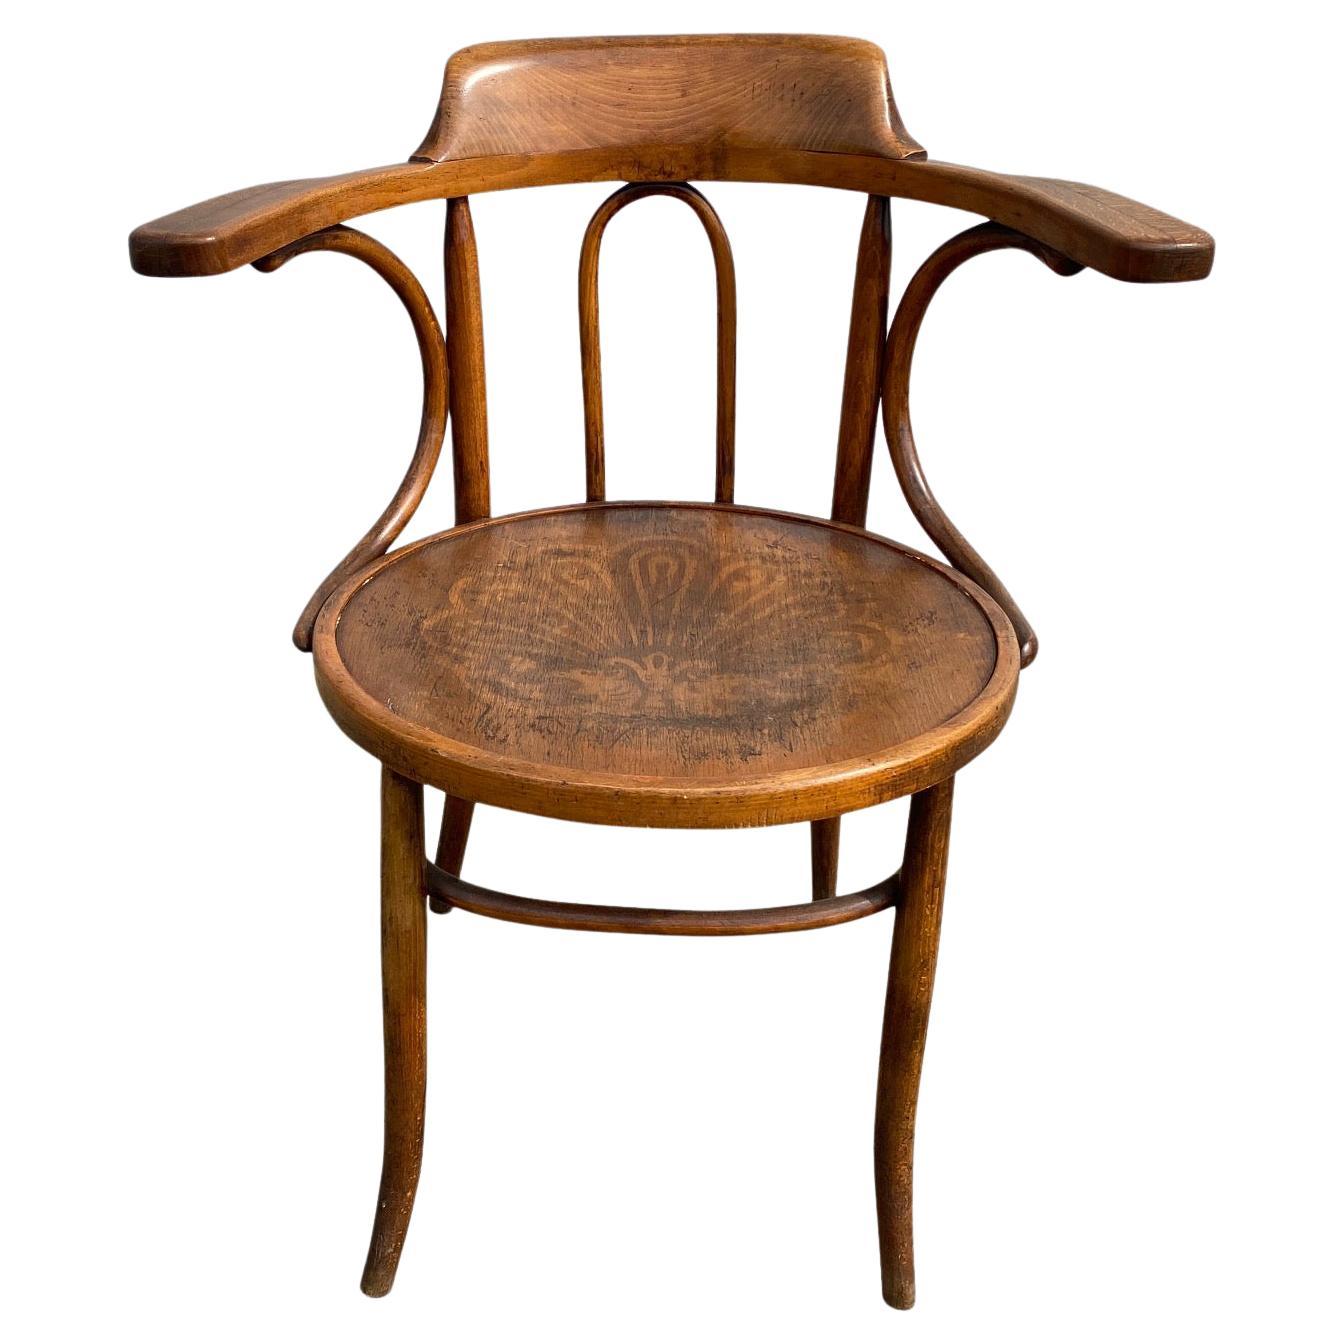 French Art Nouveau Period Bentwood Armchair by Thonet For Sale